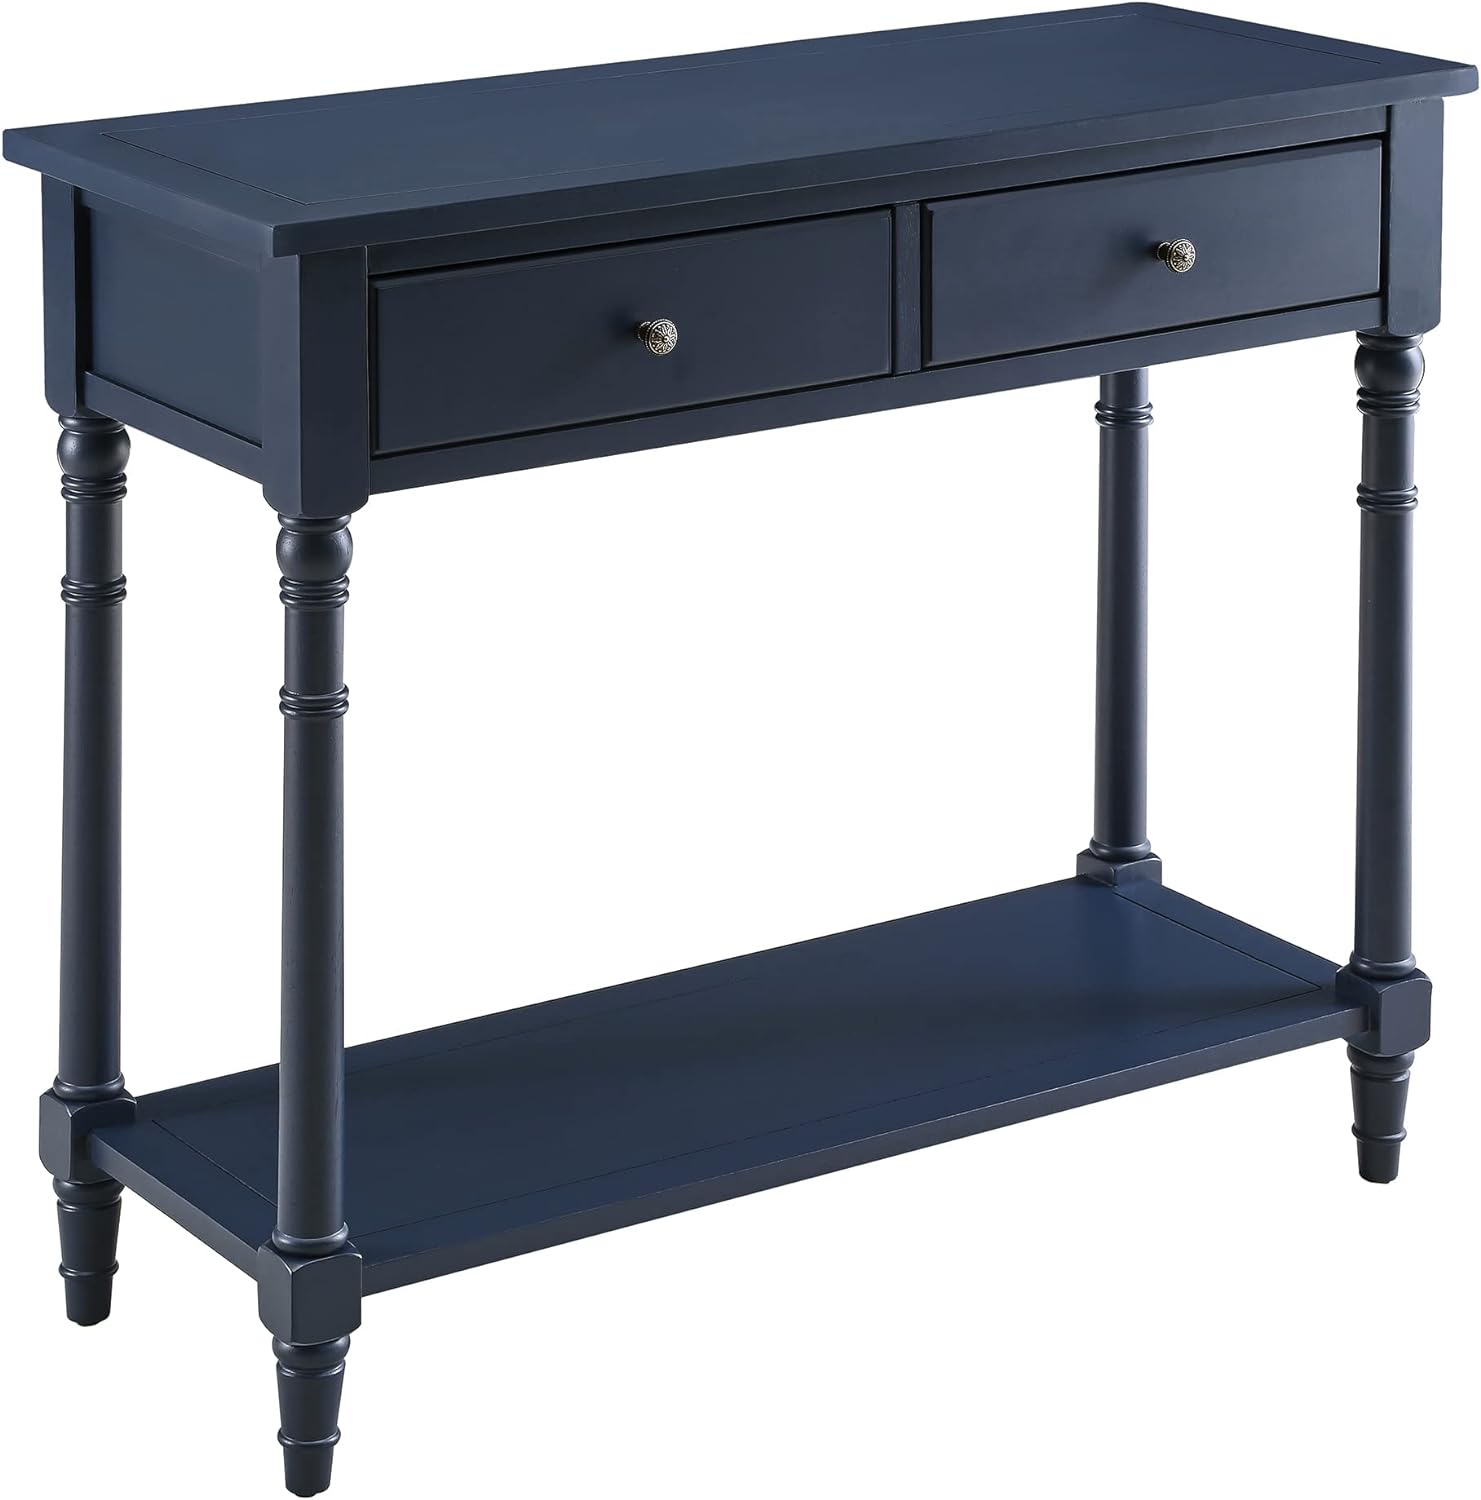 Entryway Table with Storage Drawers, Console Table with Shelf, Blue SFZ-004-BL - $110